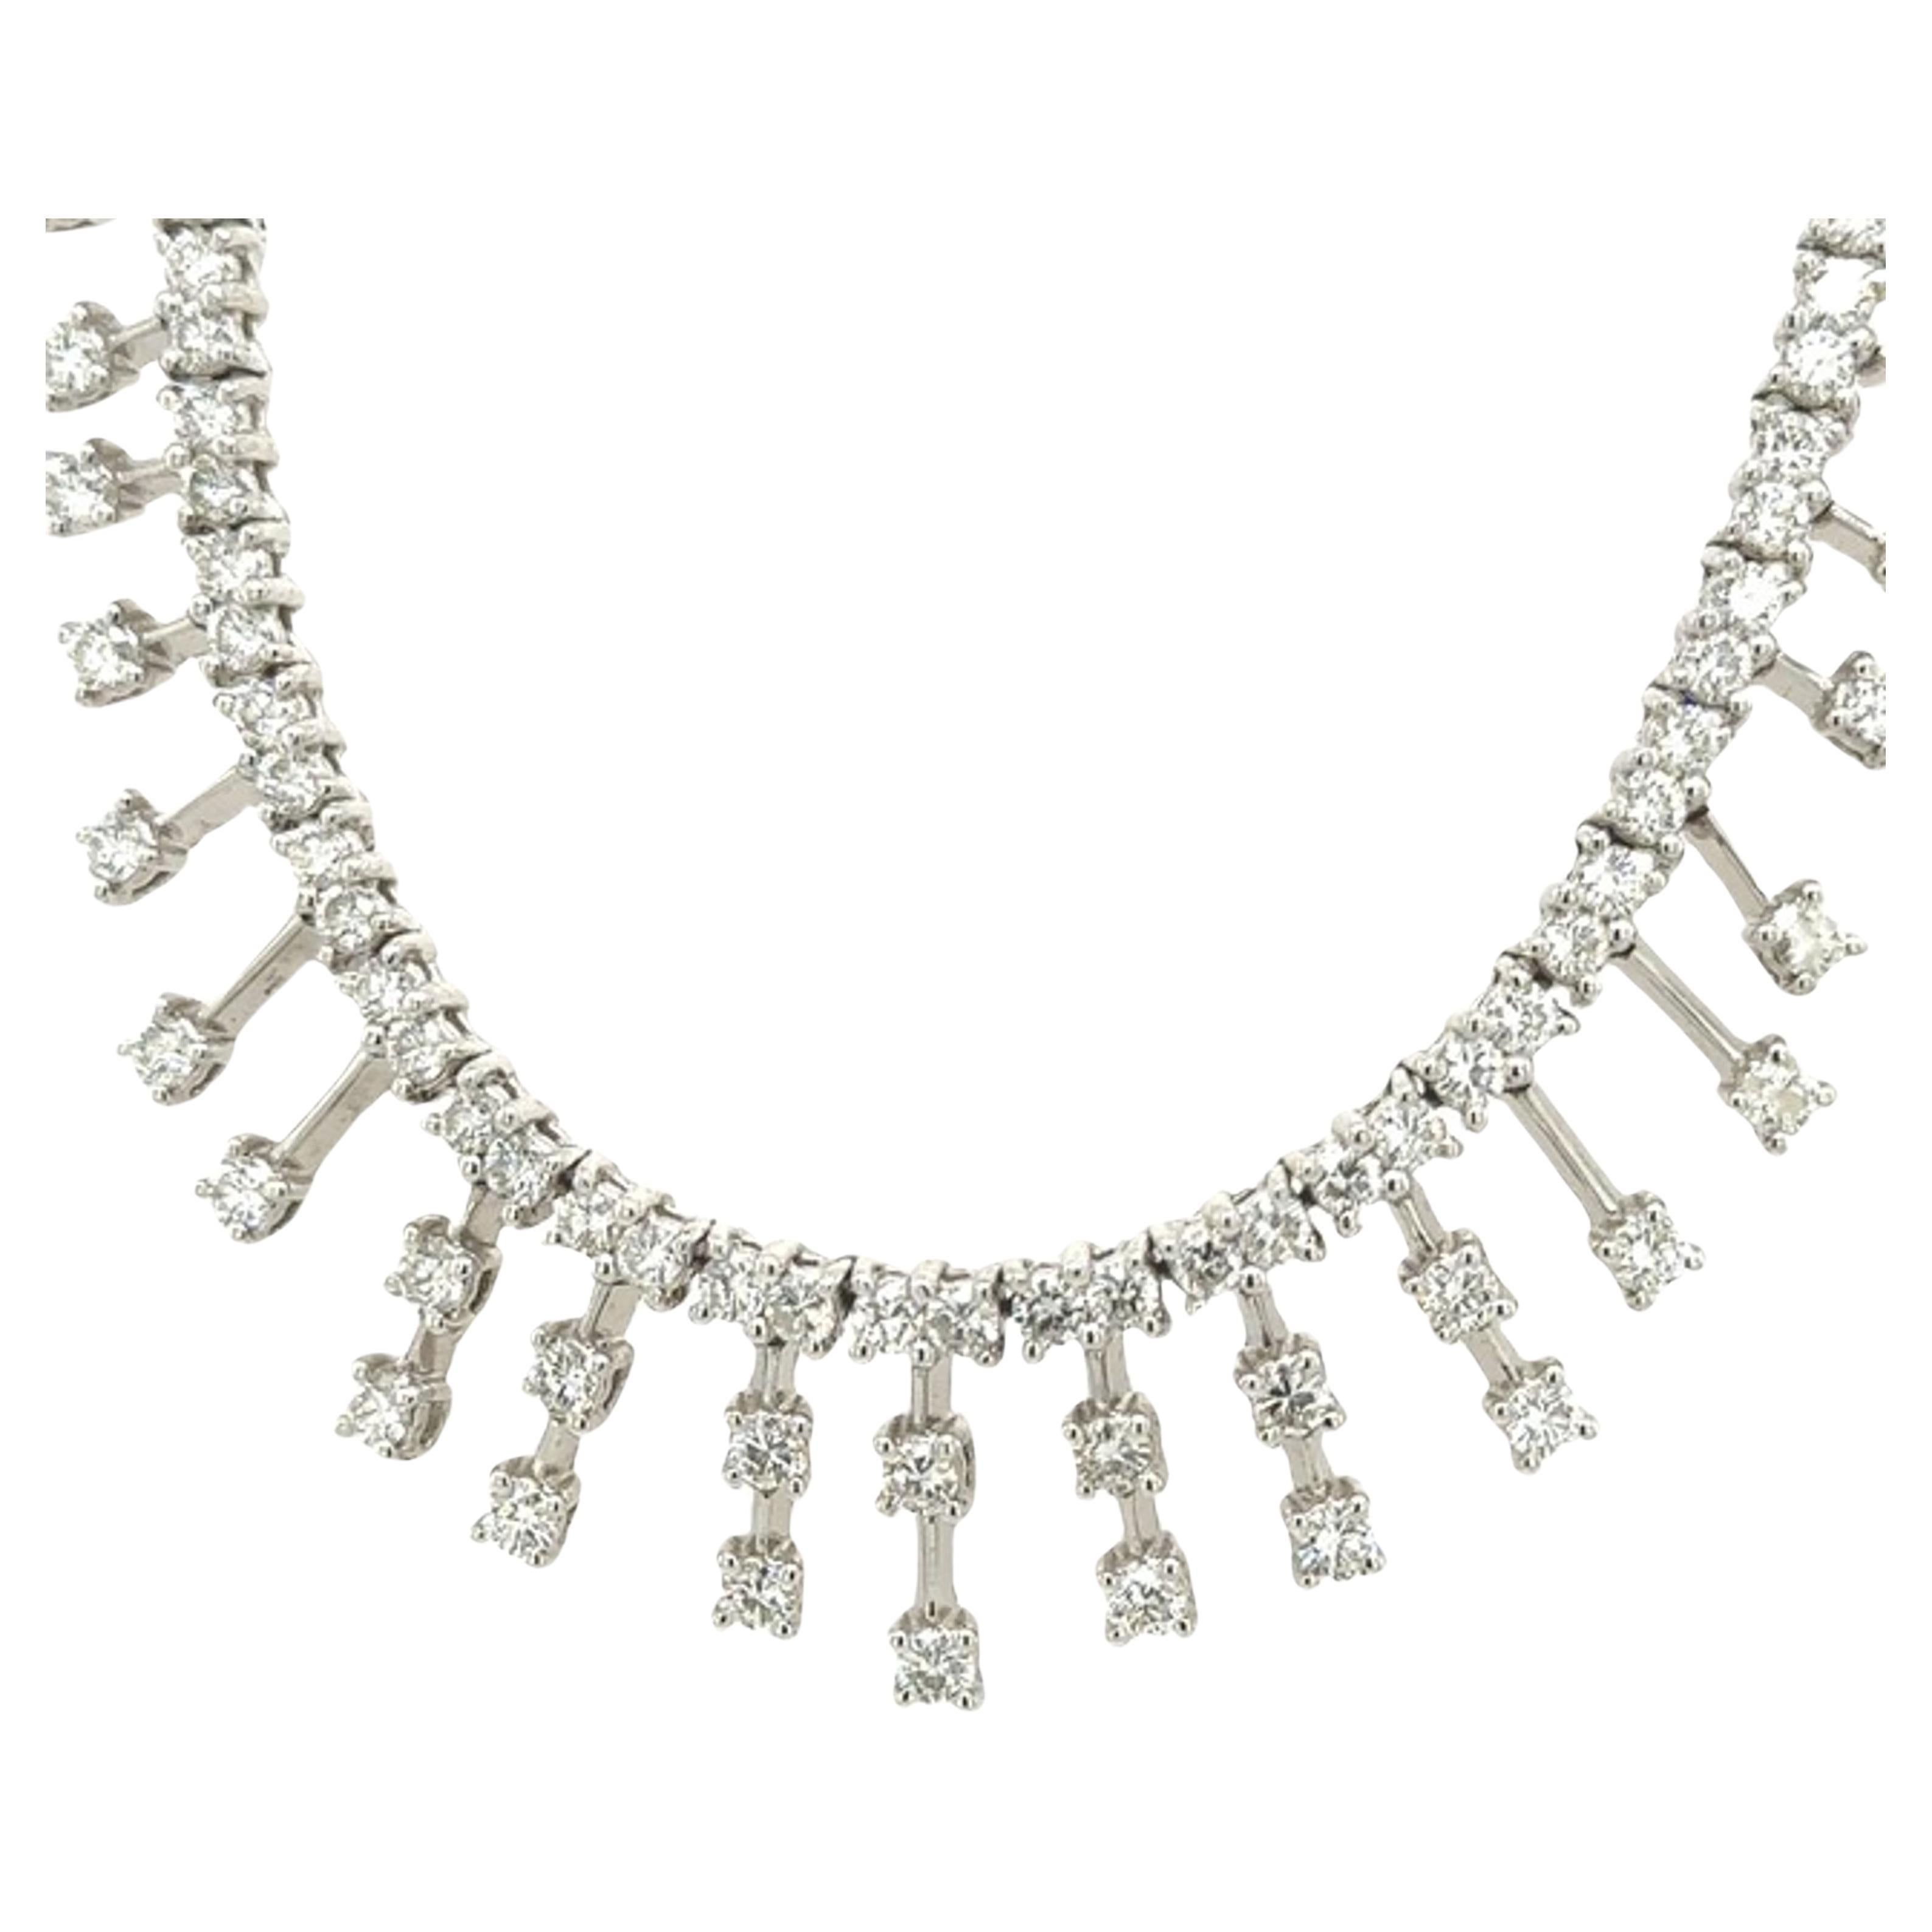 Diamond Tennis Necklace Set with 4.0ct of Round Diamonds in 18ct White Gold